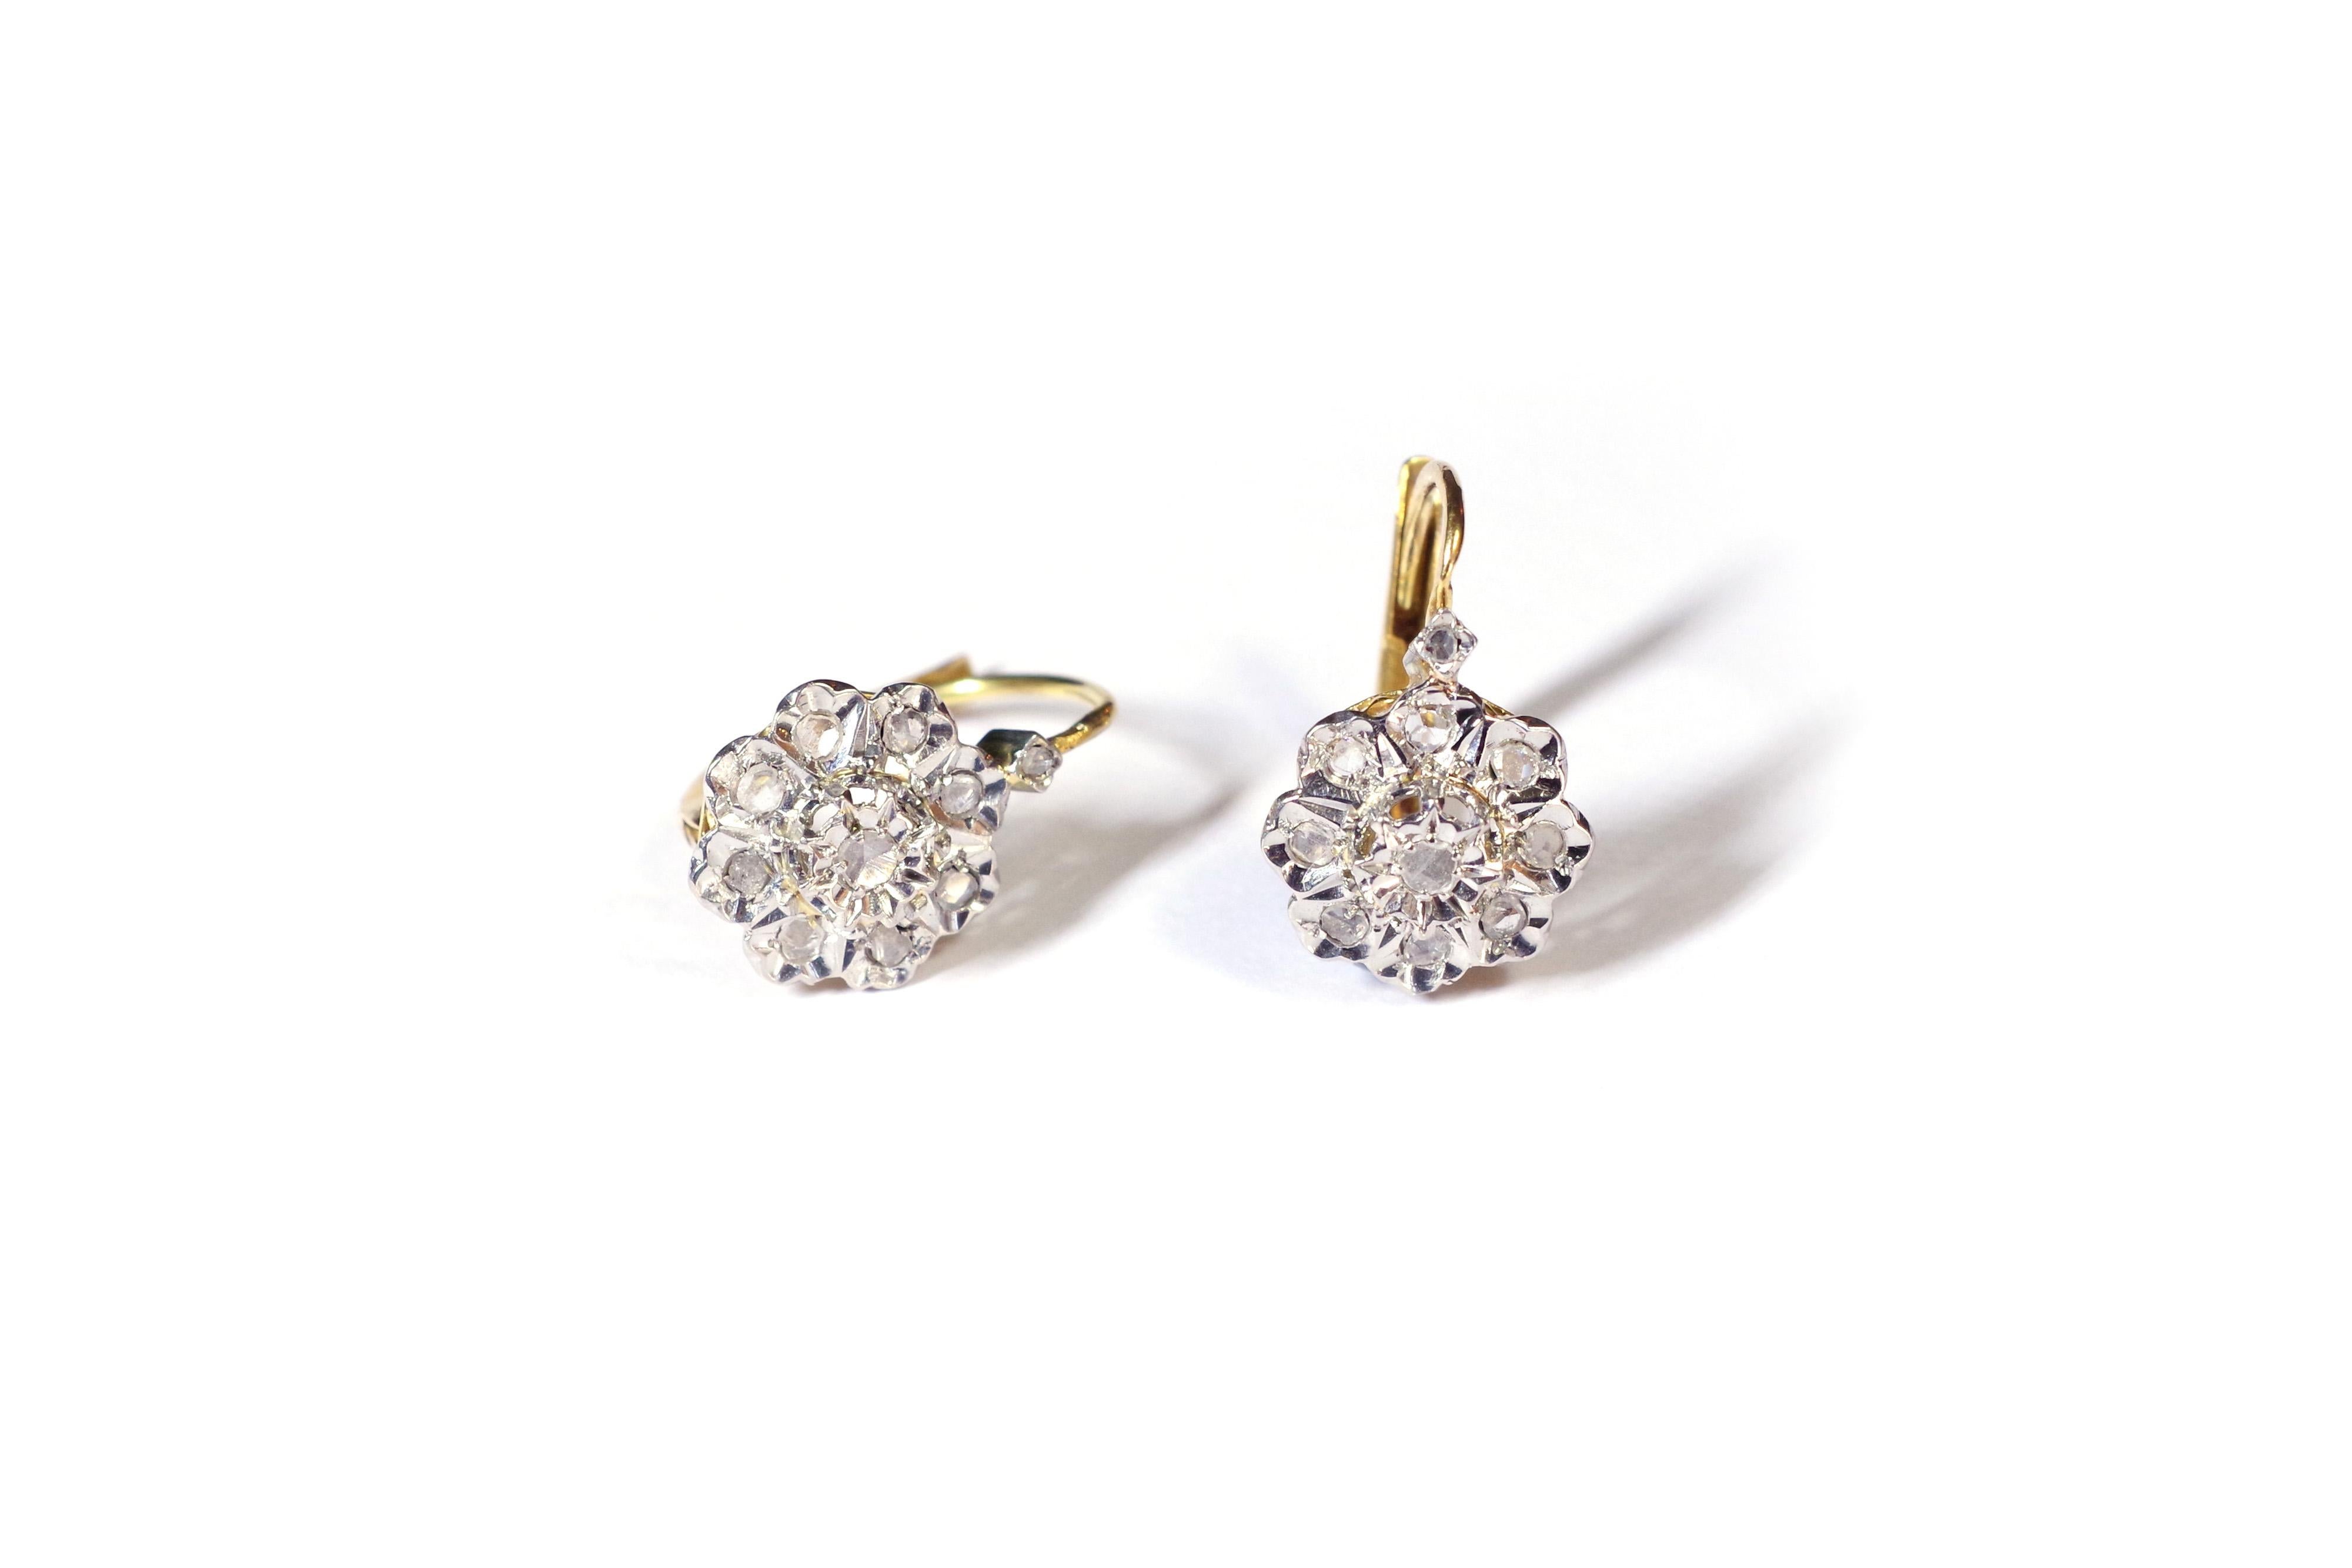 Belle Epoque diamond earrings in 18 karat yellow gold and platinum. Drop earrings forming a flower or daisy, decorated with ten flat rose-cut diamonds in a setting in platinum. The setting of the earrings is in yellow gold. Antique earrings from the